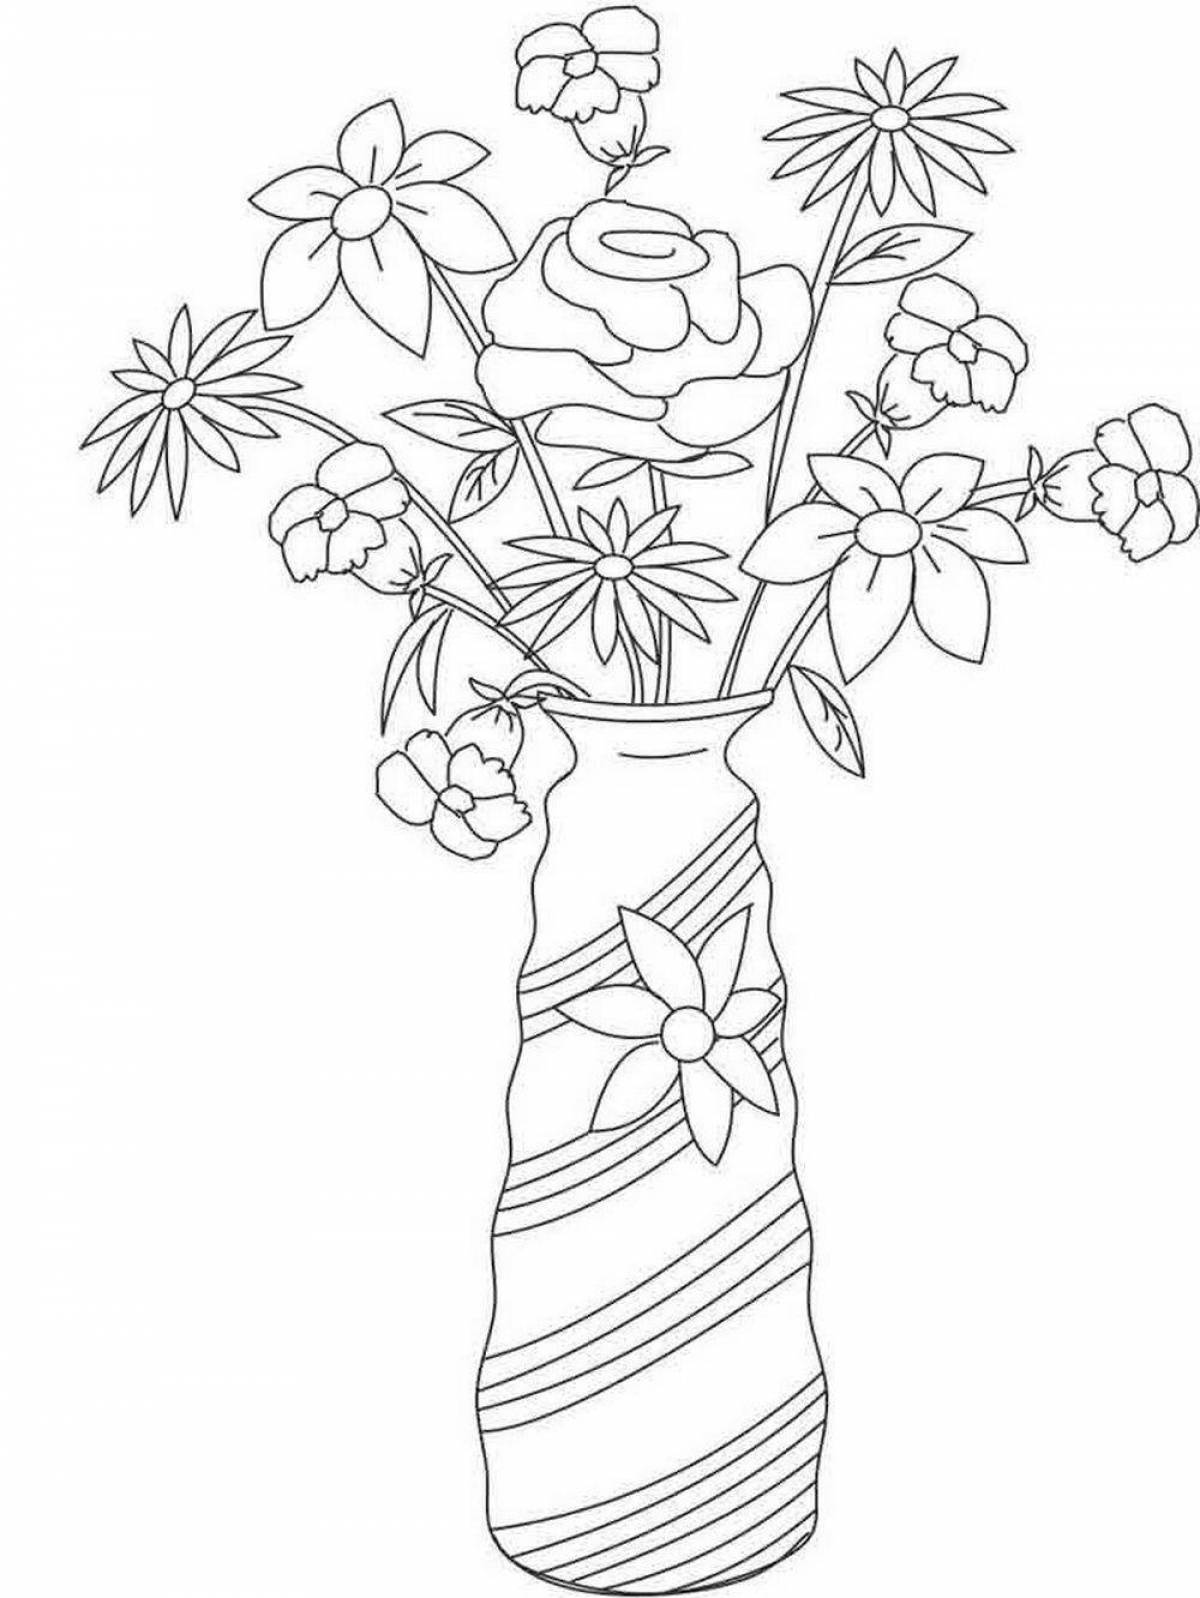 Wonderful coloring flowers in a vase for kids